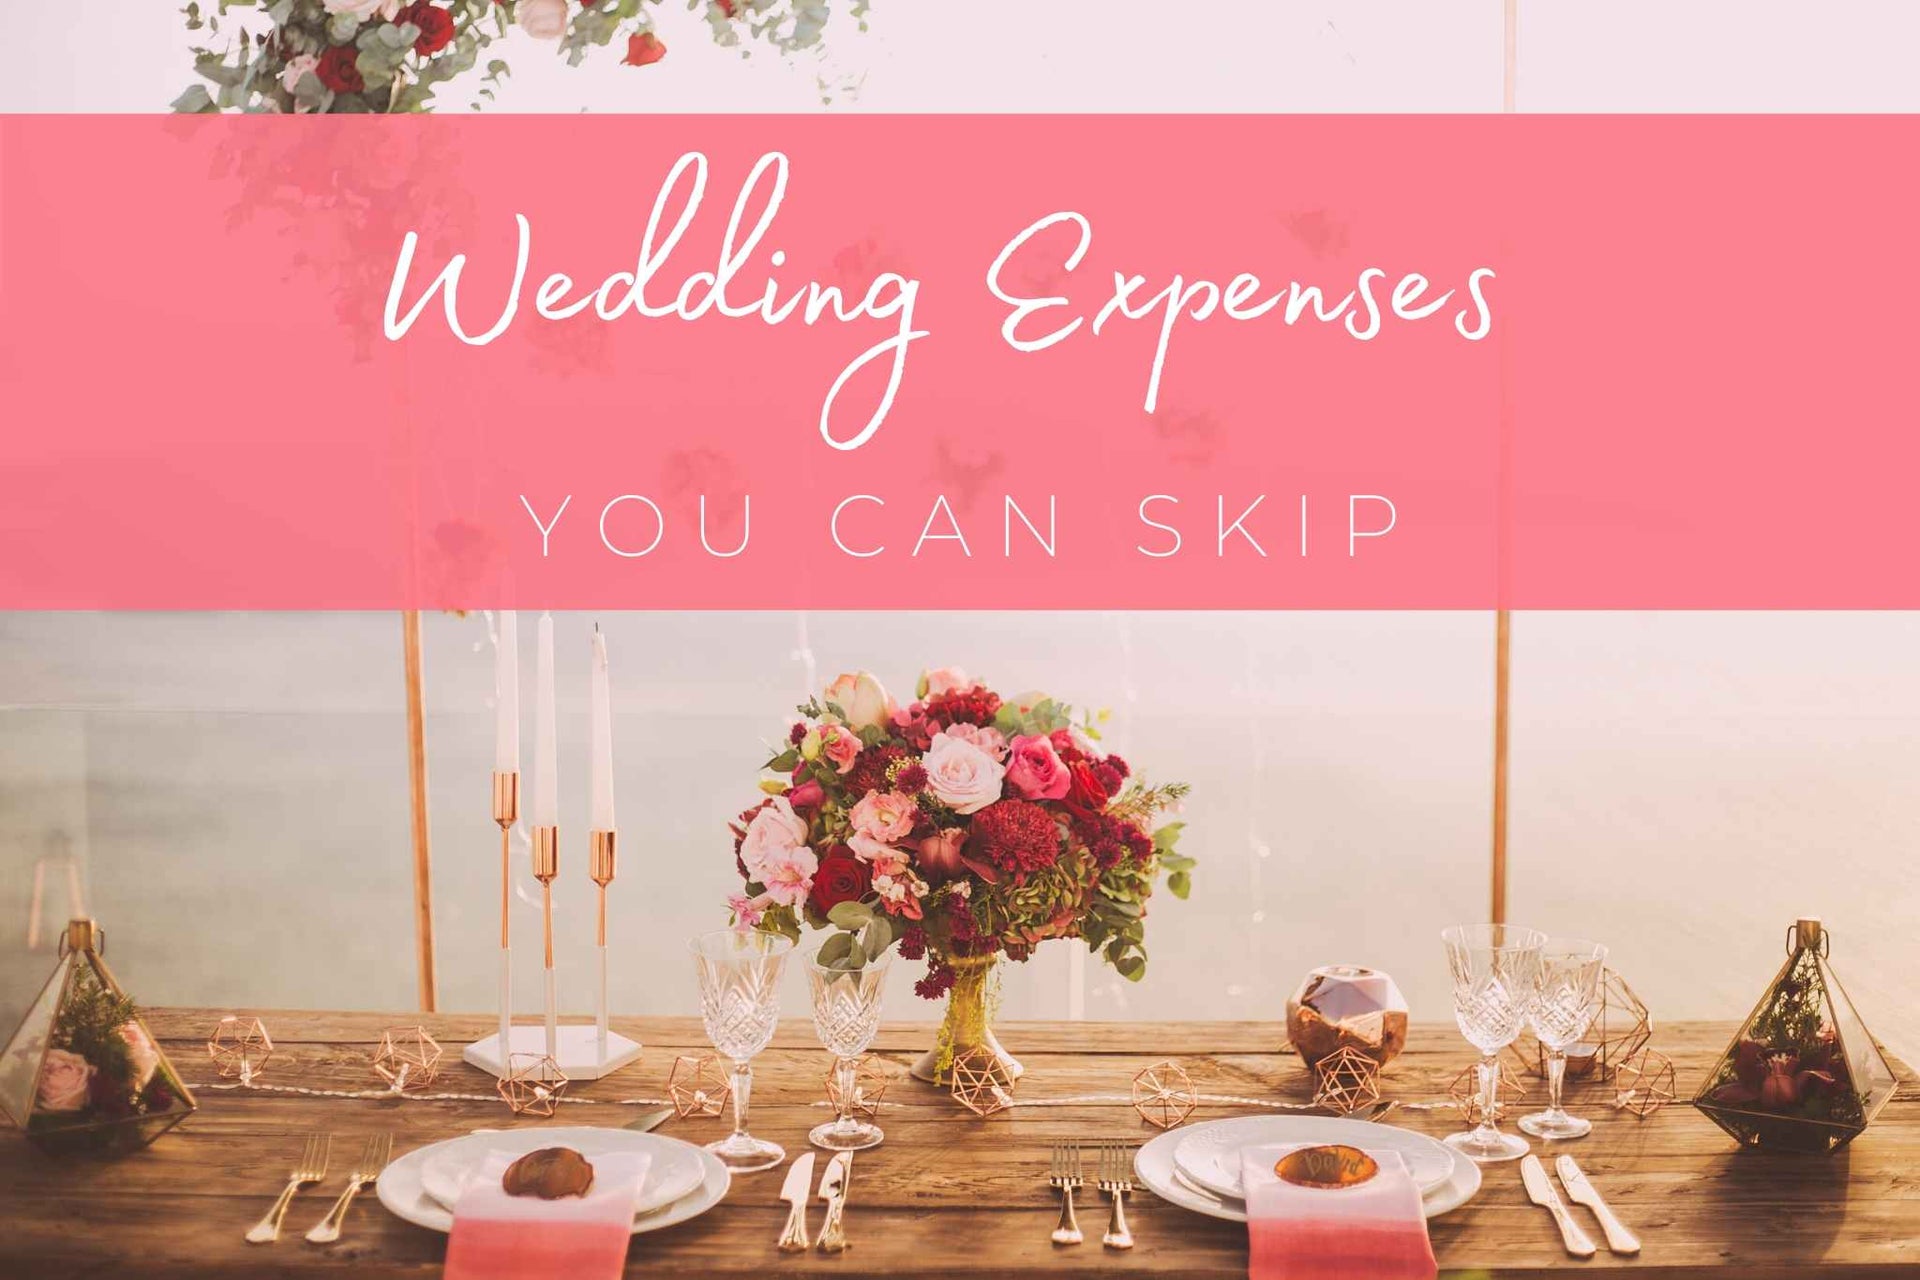 Wedding Expenses You Can Skip